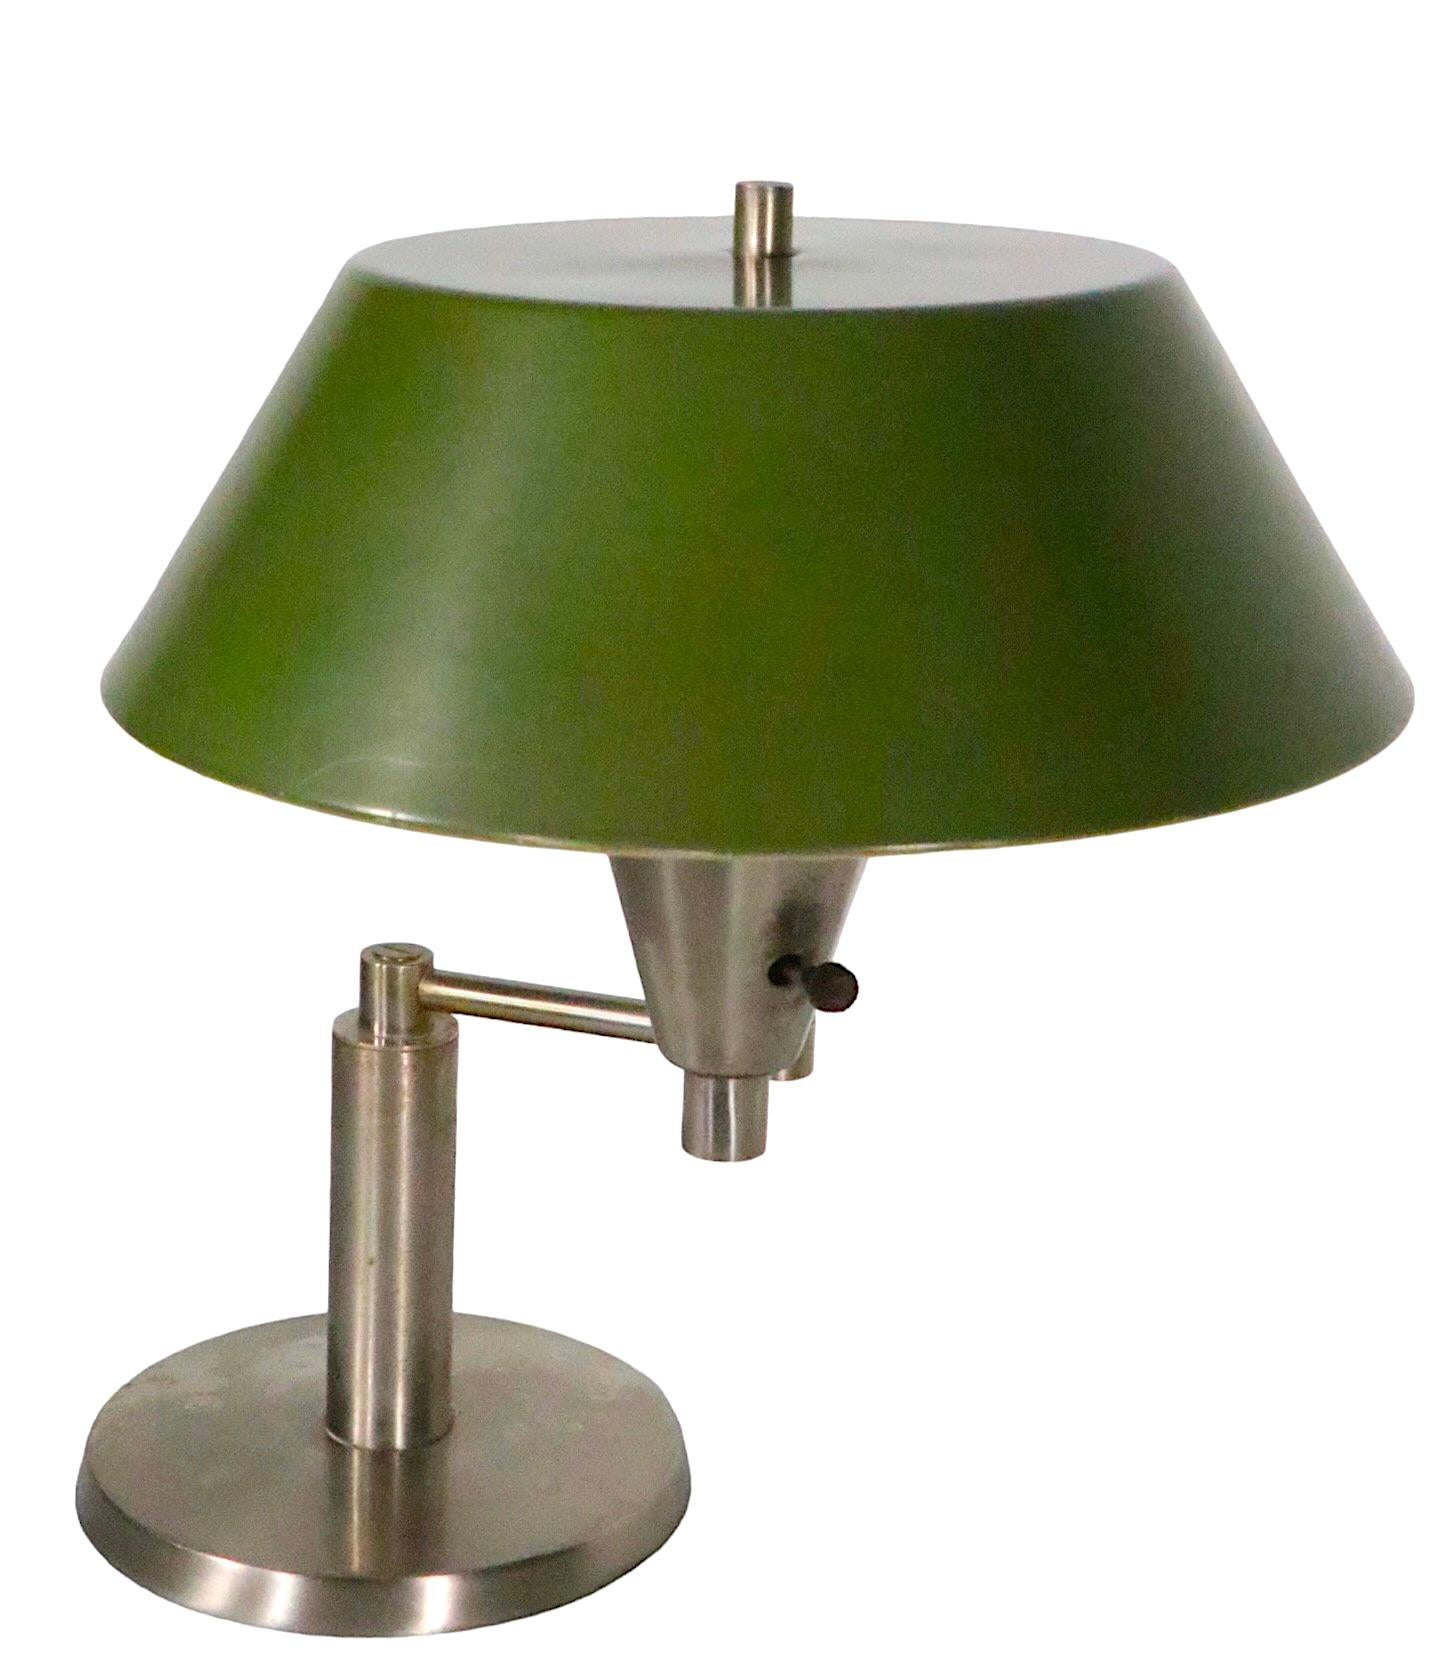 Iconic Walter Von Nessen Swing Arm Desk Lamp with Original Metal Shade For Sale 3